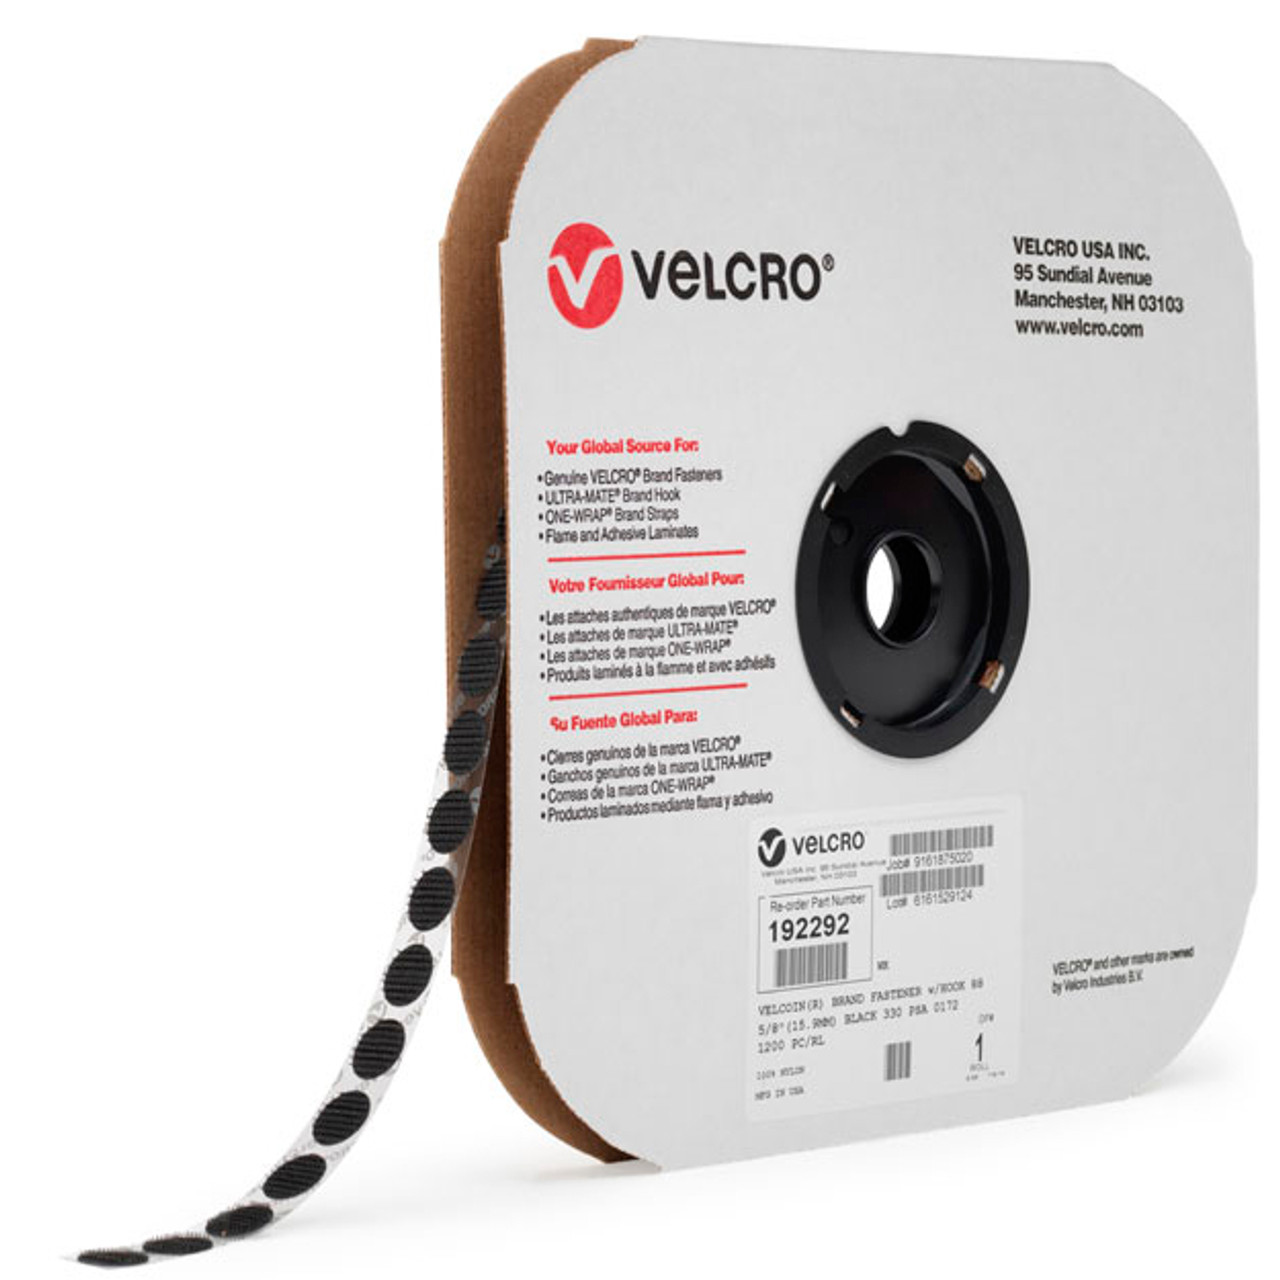 VELCRO® Brand Adhesive Tape 5/8 x 25 yard roll sold by INDUSTRIAL WEBBING  CORP